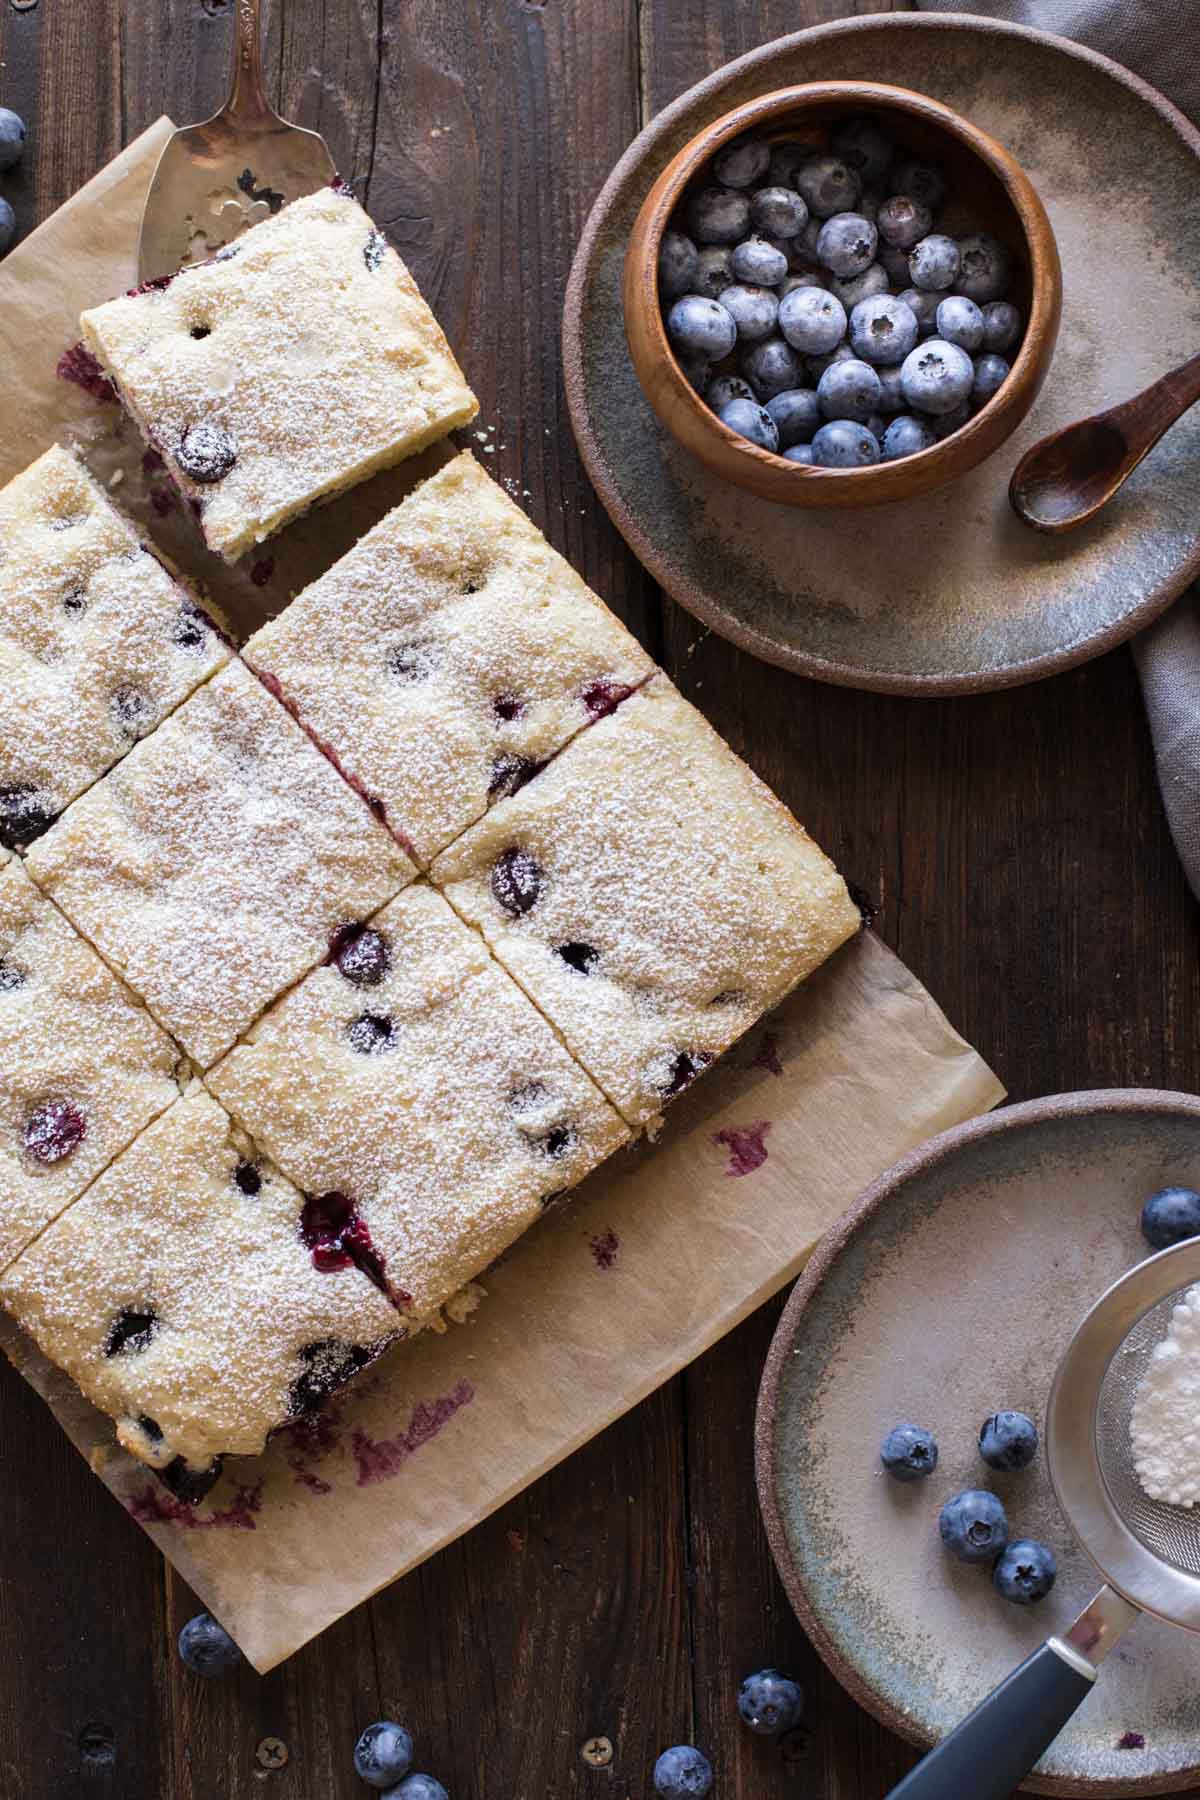 Buttermilk Blueberry Snack Cake sliced on a piece of parchment paper, with a small wood bowl of blueberries on a plate next to it, as well as a plate with a sifter full of powdered sugar.